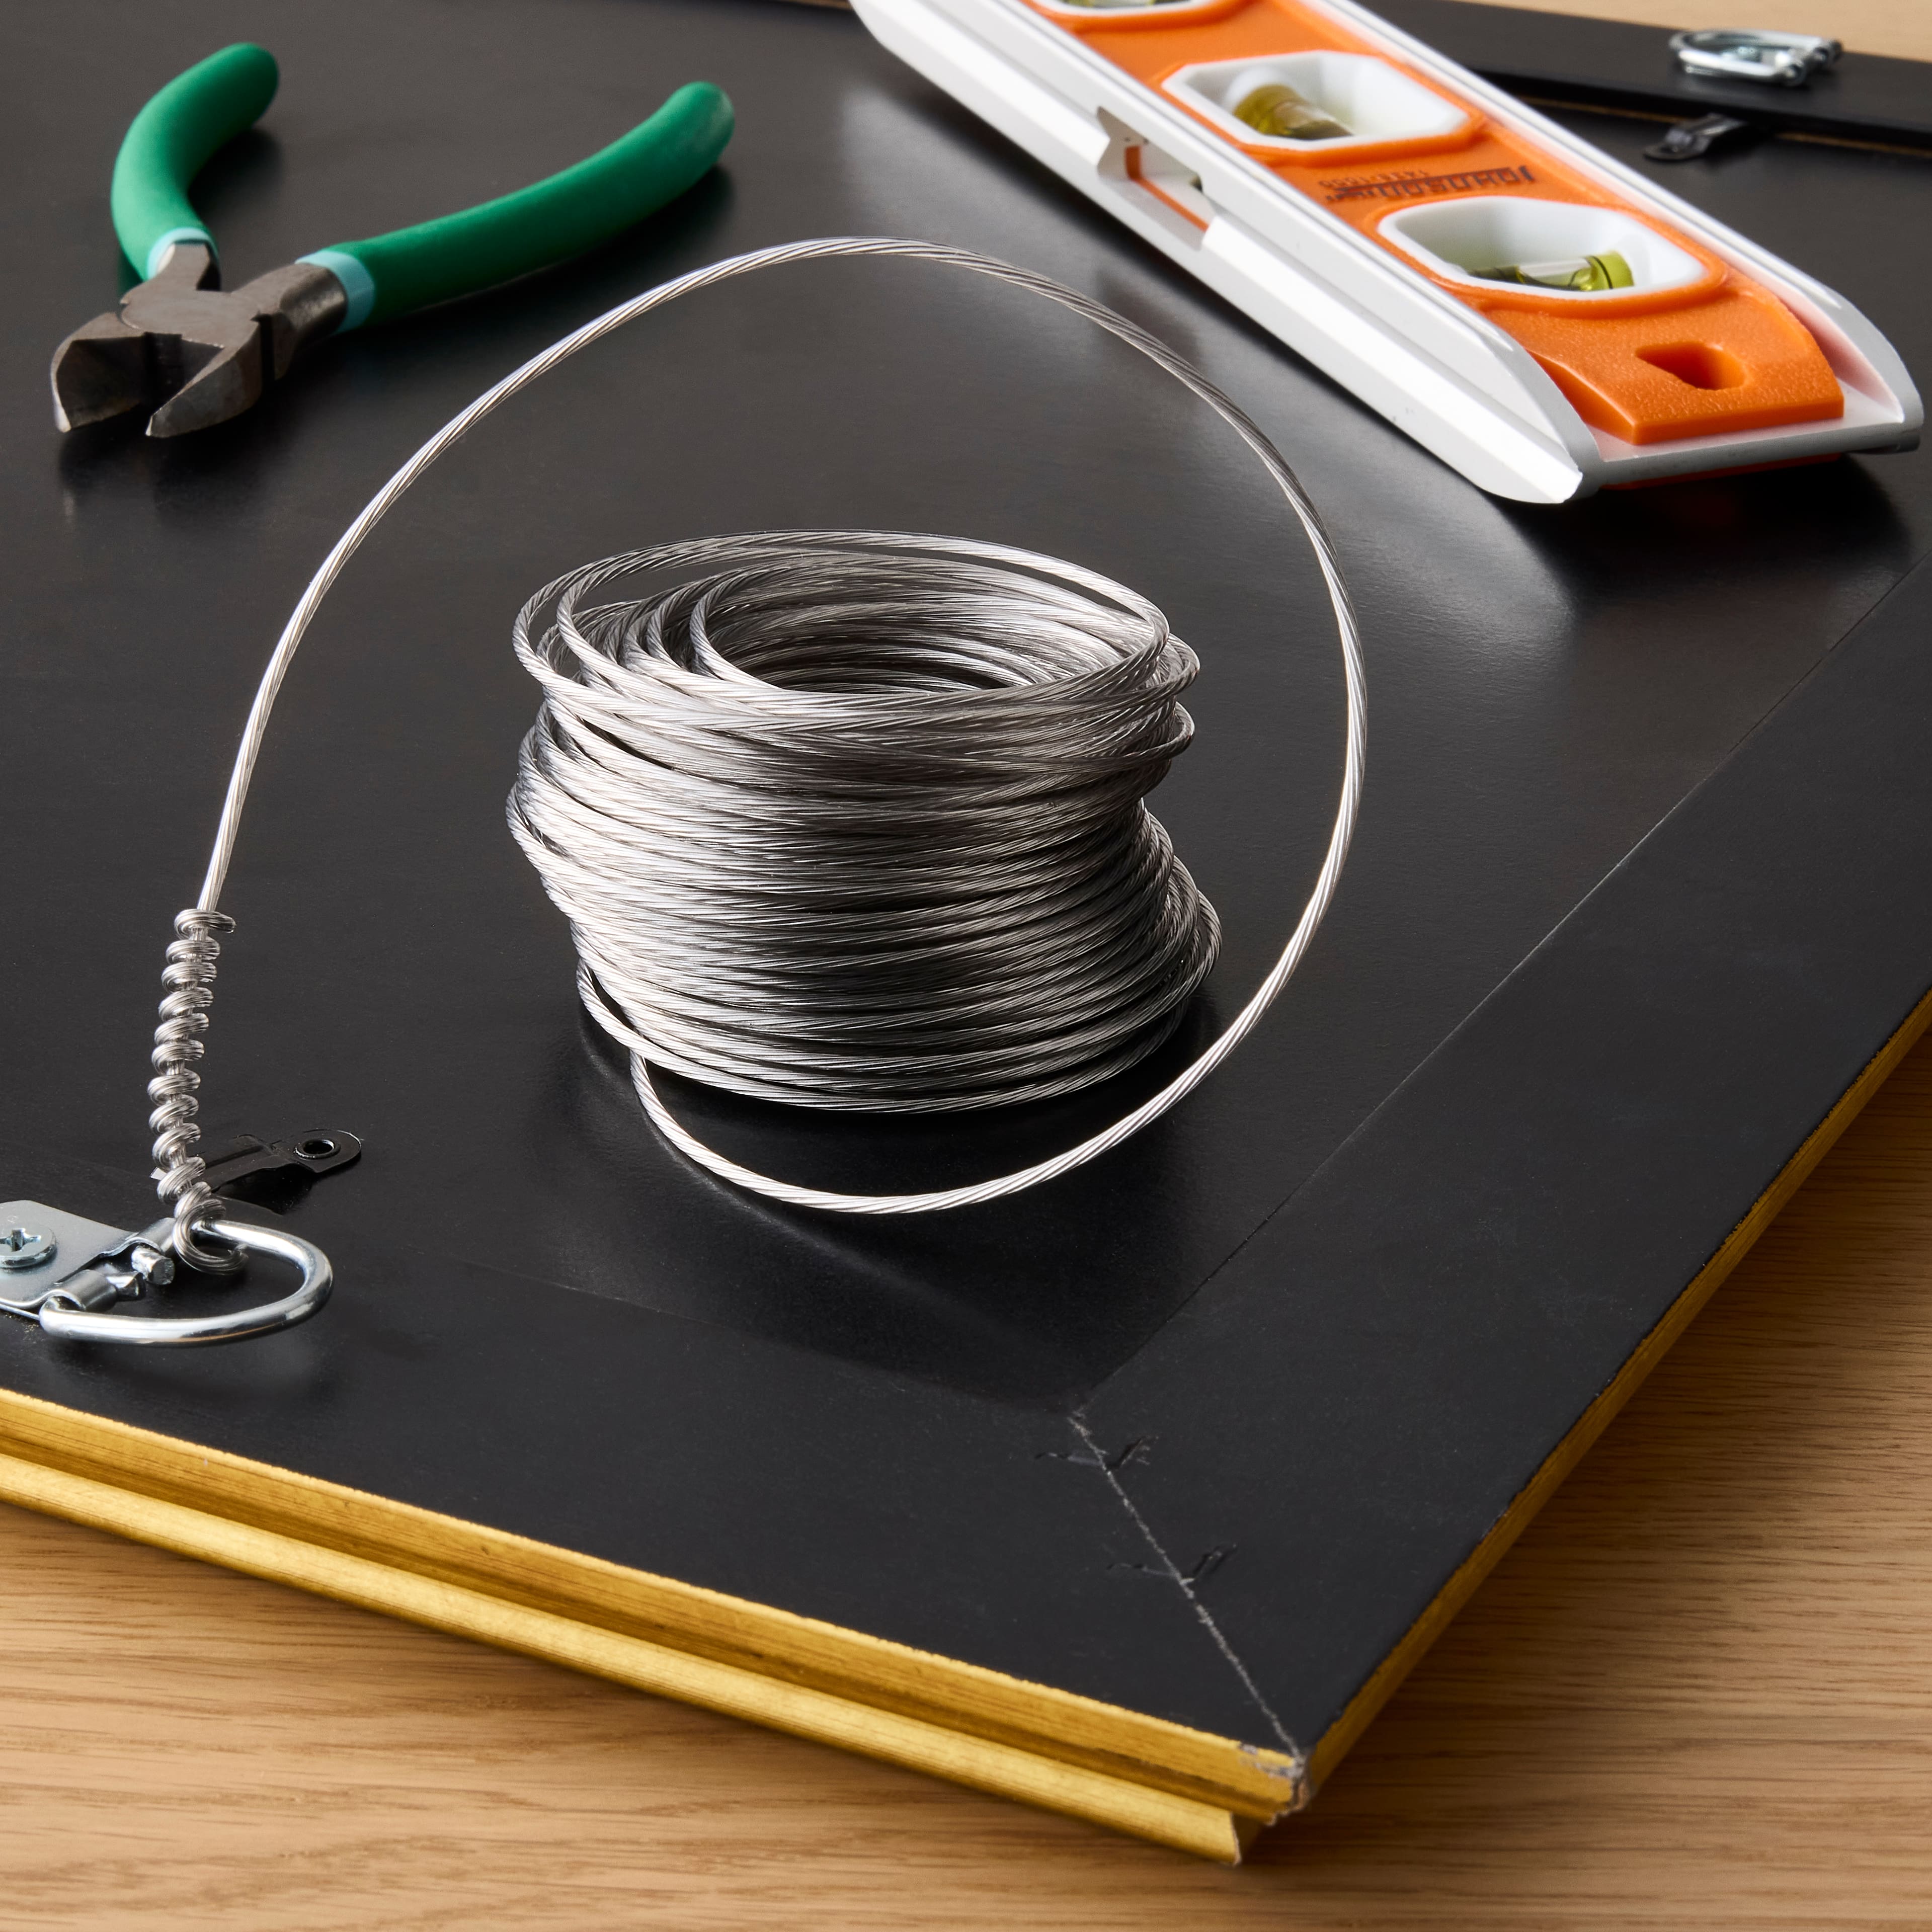 Shop for the 9ft. Galvanized Braided Hanging Wire, 20lb. at Michaels